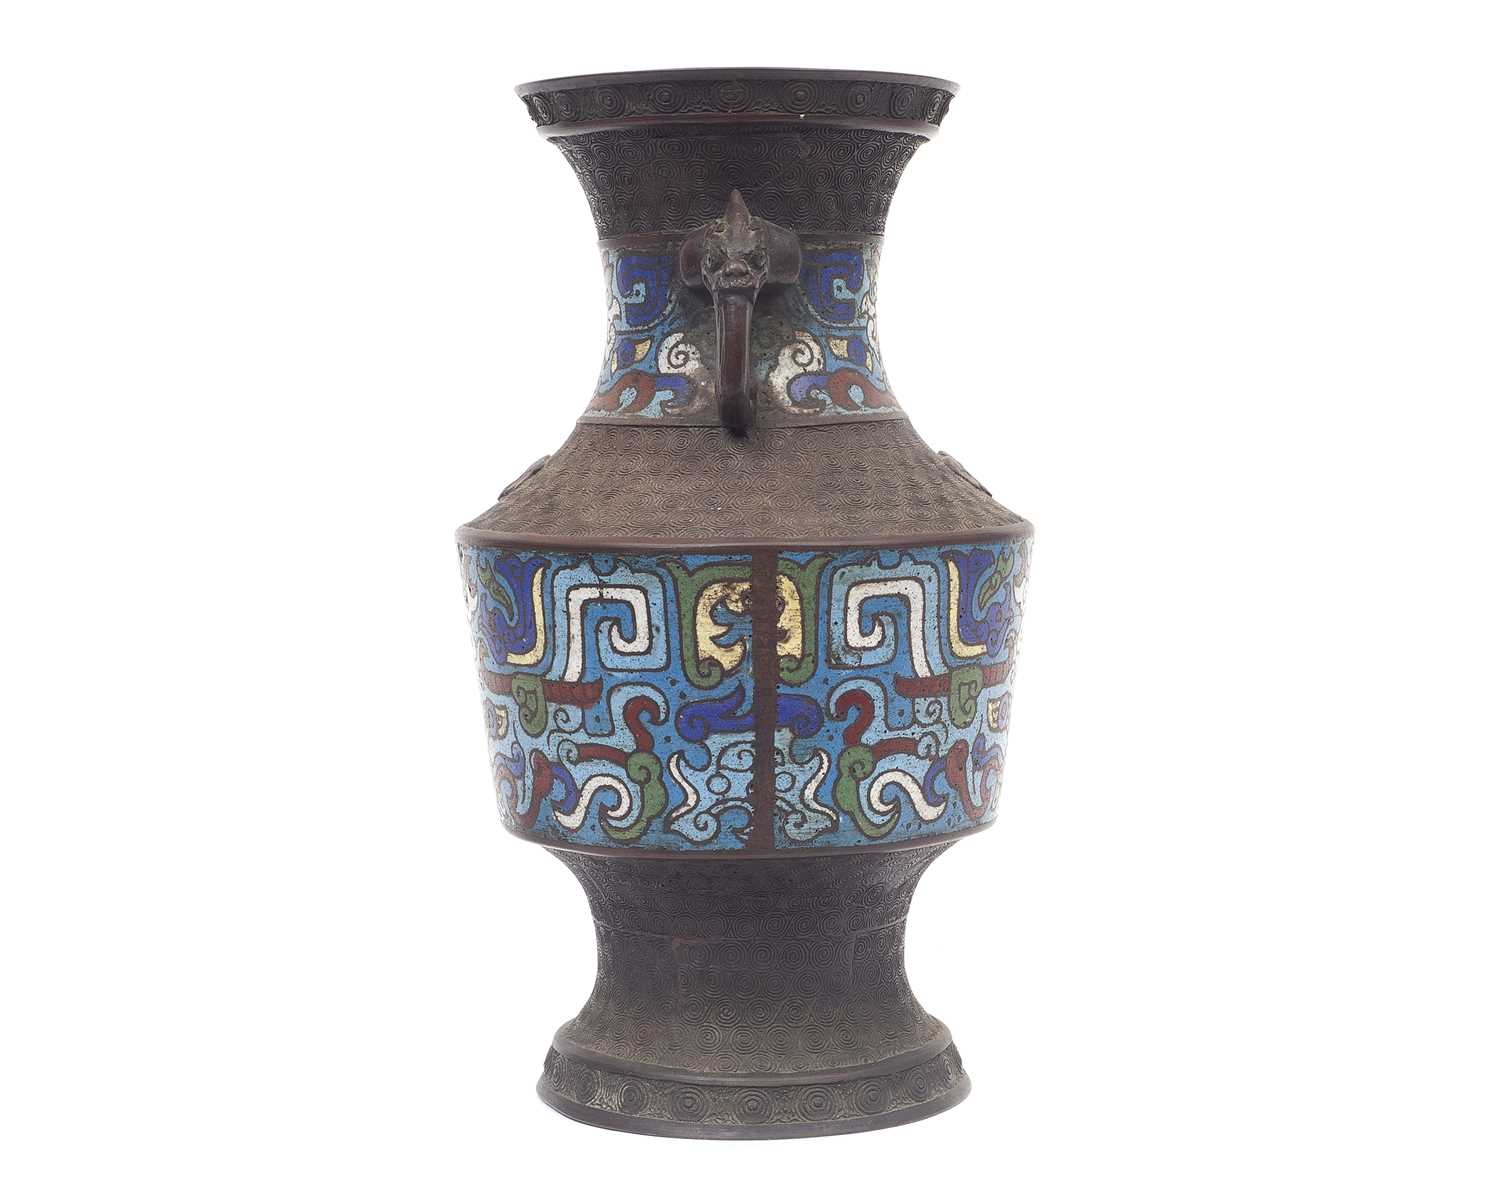 A CHINESE ARCHAIC STYLE BRONZE AND CLOISONNE ENAMEL VASE - Image 3 of 4